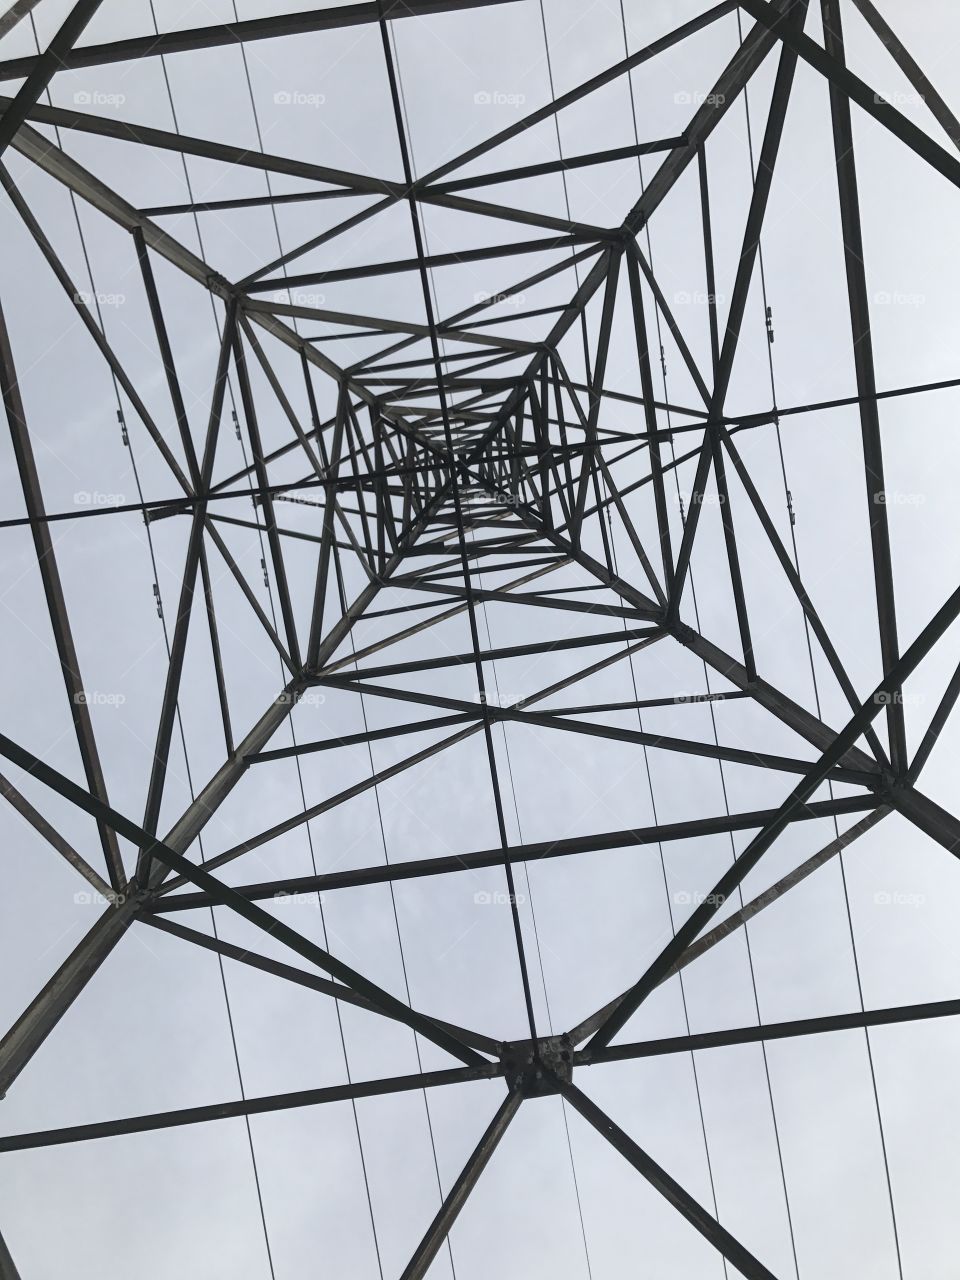 Utility Tower
